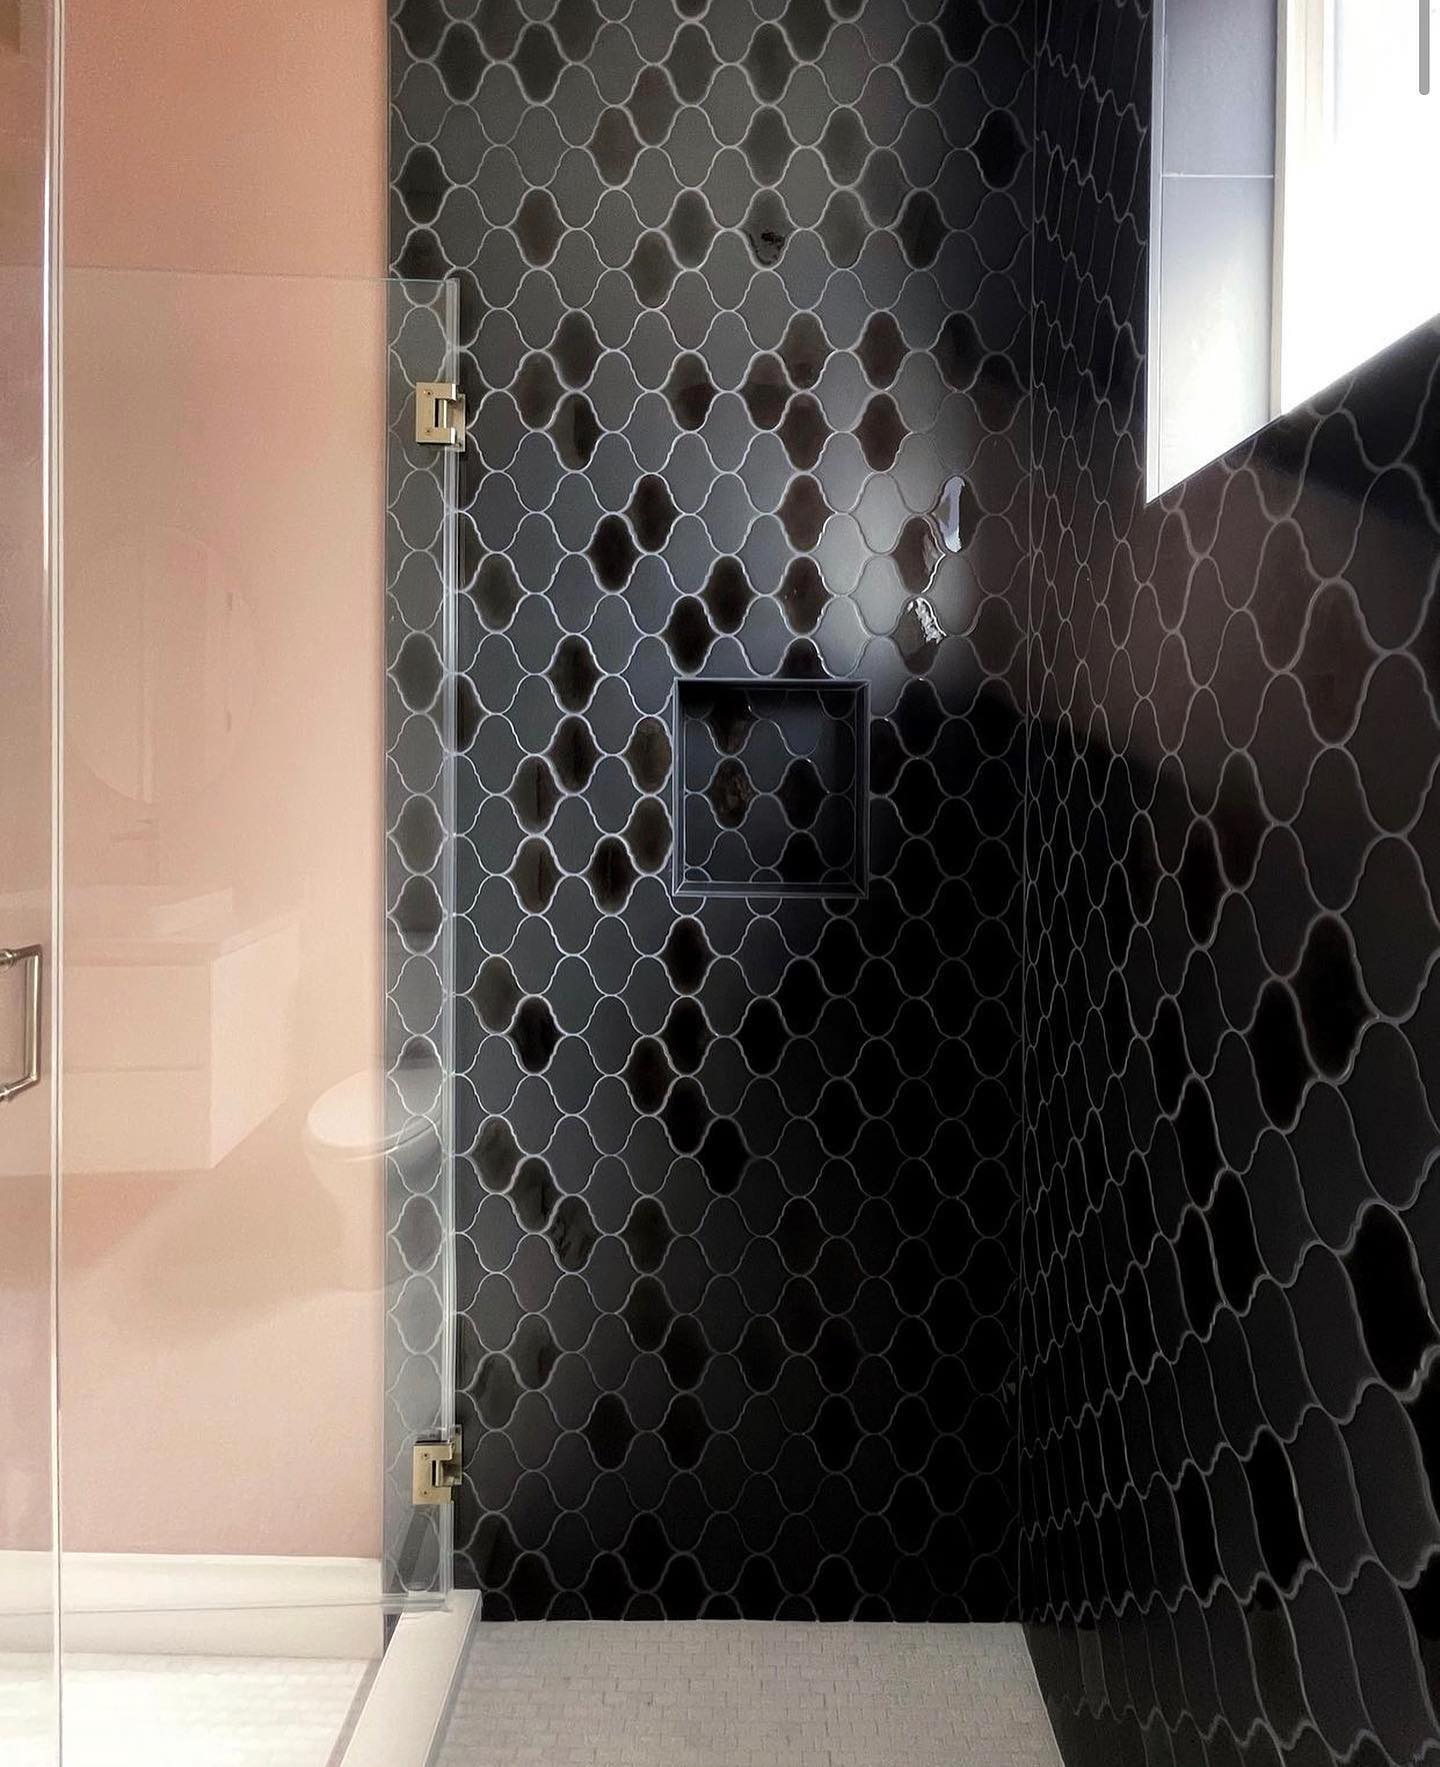 We love the use of our Retro series in Chrome Cloud on this shower wall paired with a nude pink paint color to compliment the bronze accents in the tile, and bring some warmth to the design. #emsertile